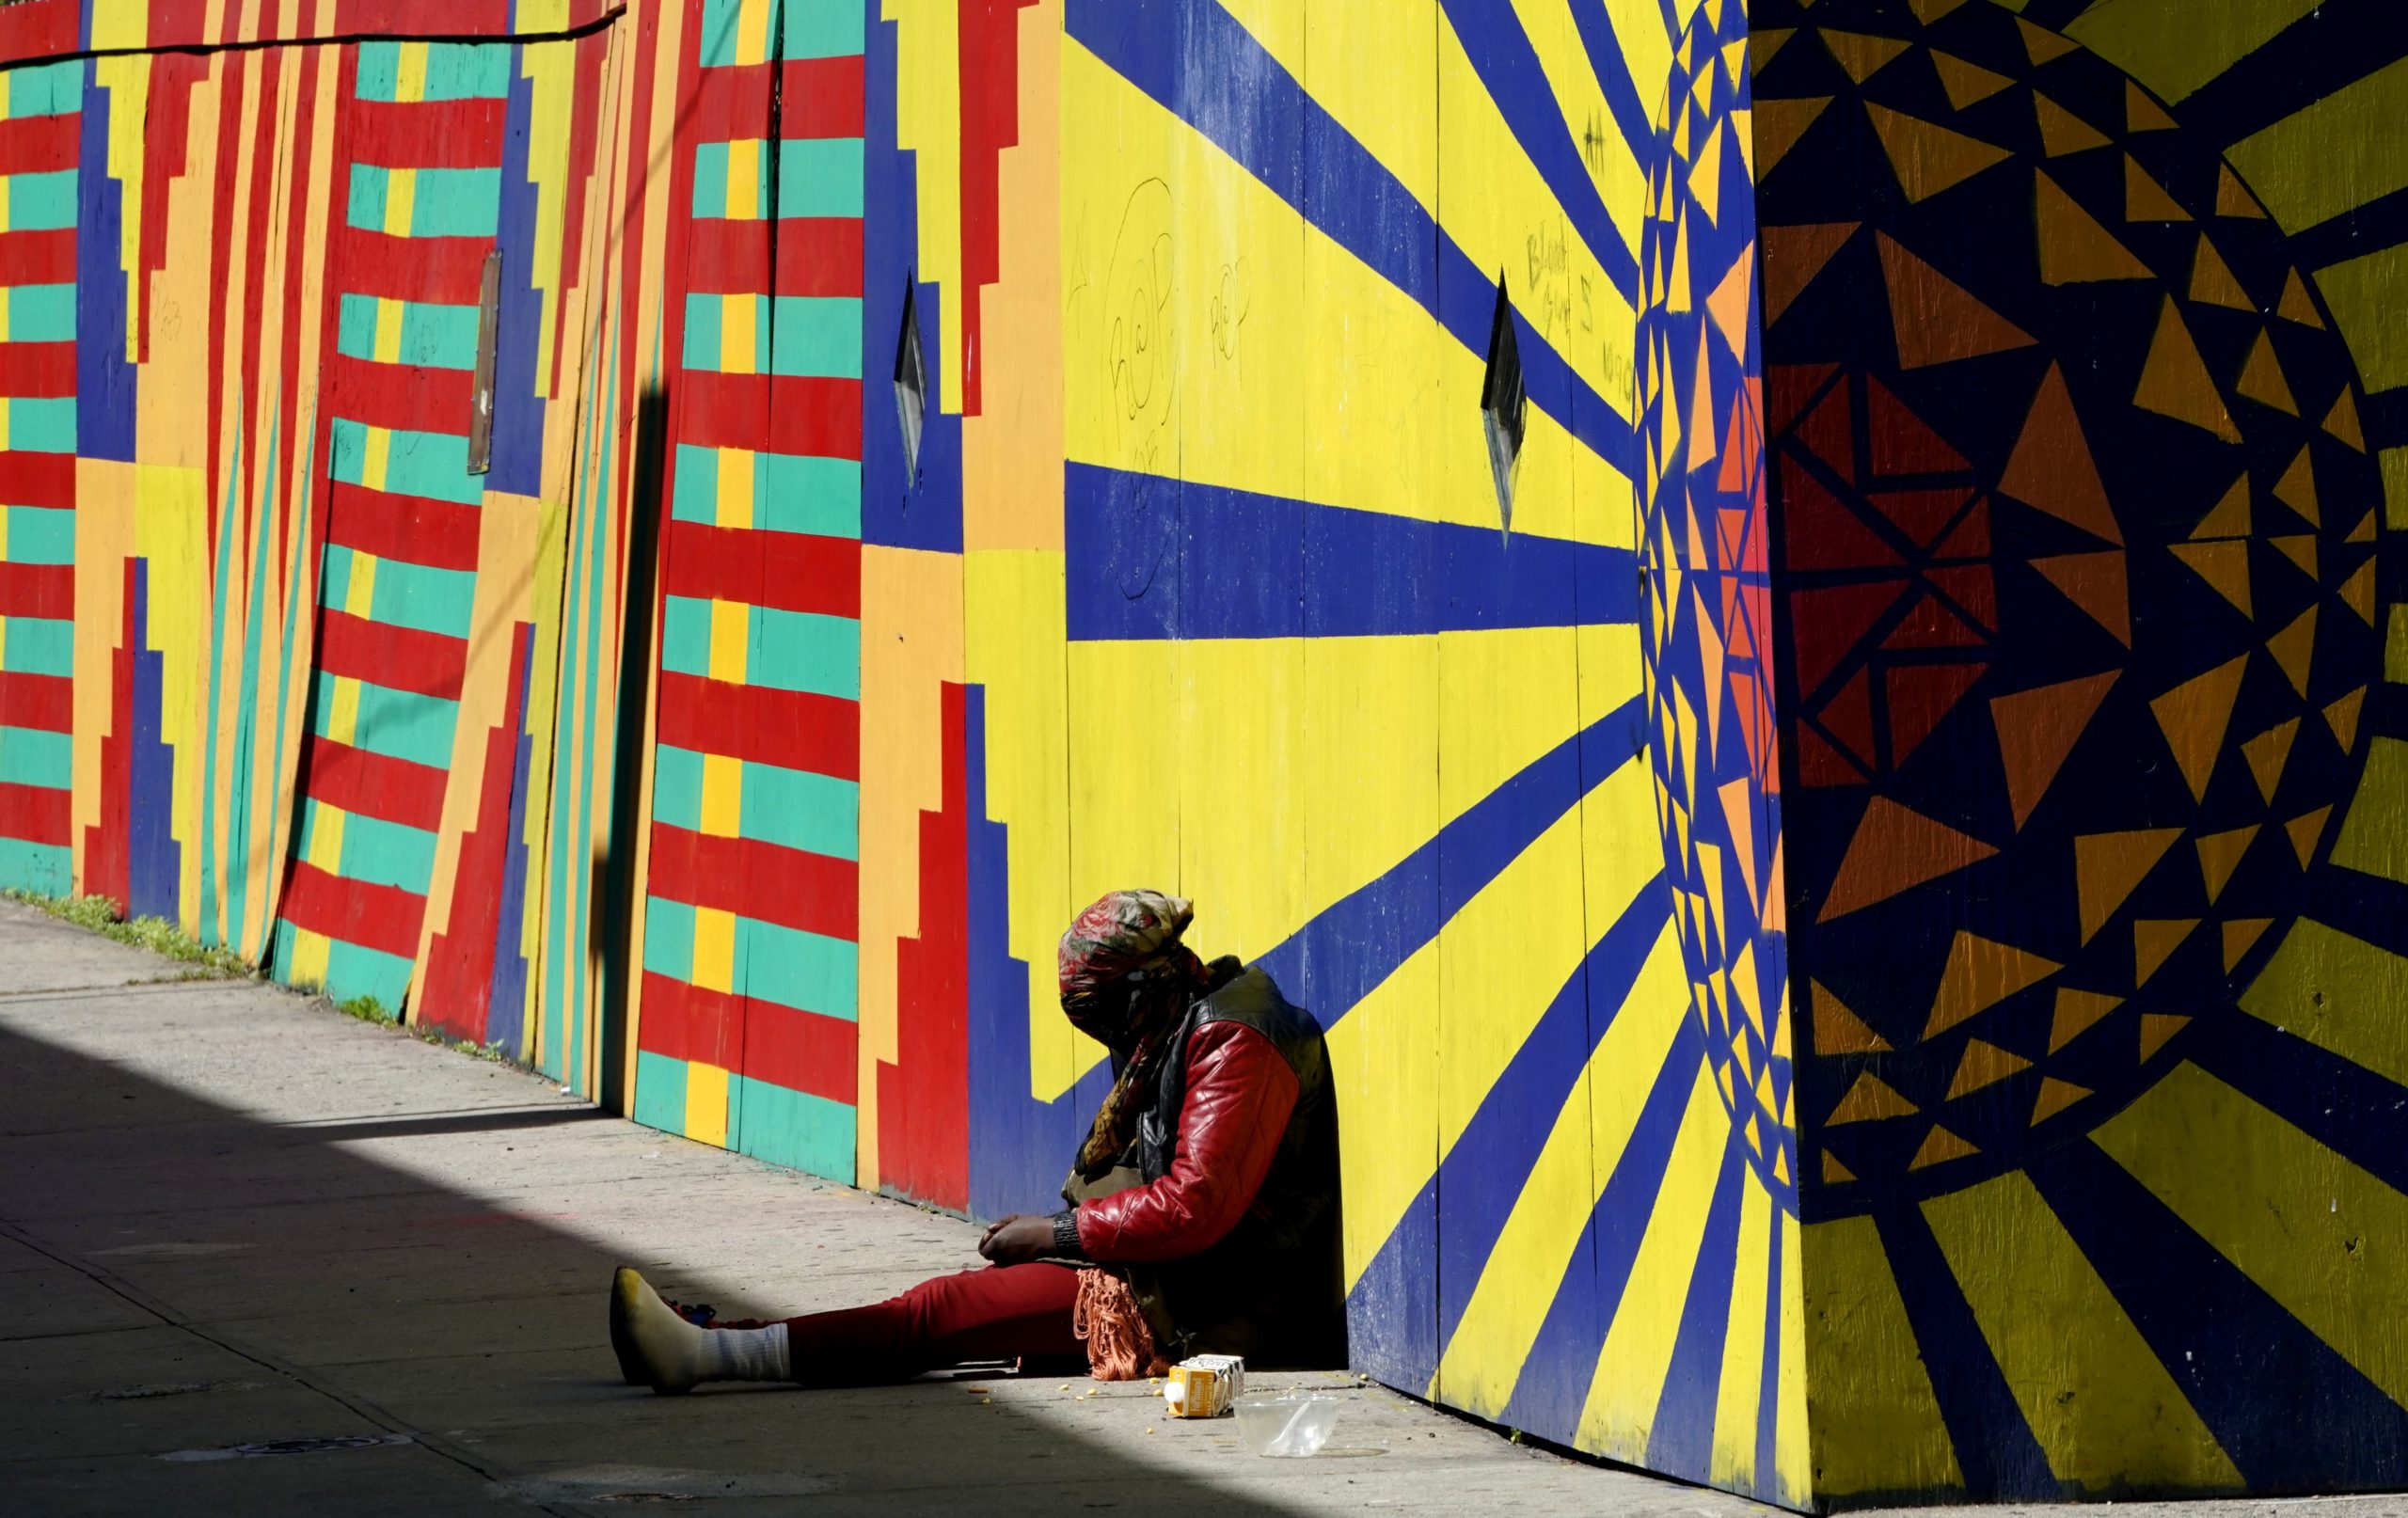 A woman sits on the sidewalk in the Harlem area of New York City on May 5, 2020, as the fear of exposure to COVID-19 in the city run shelters spreads. (Photo by Timothy A. Clary/AFP via Getty Images)